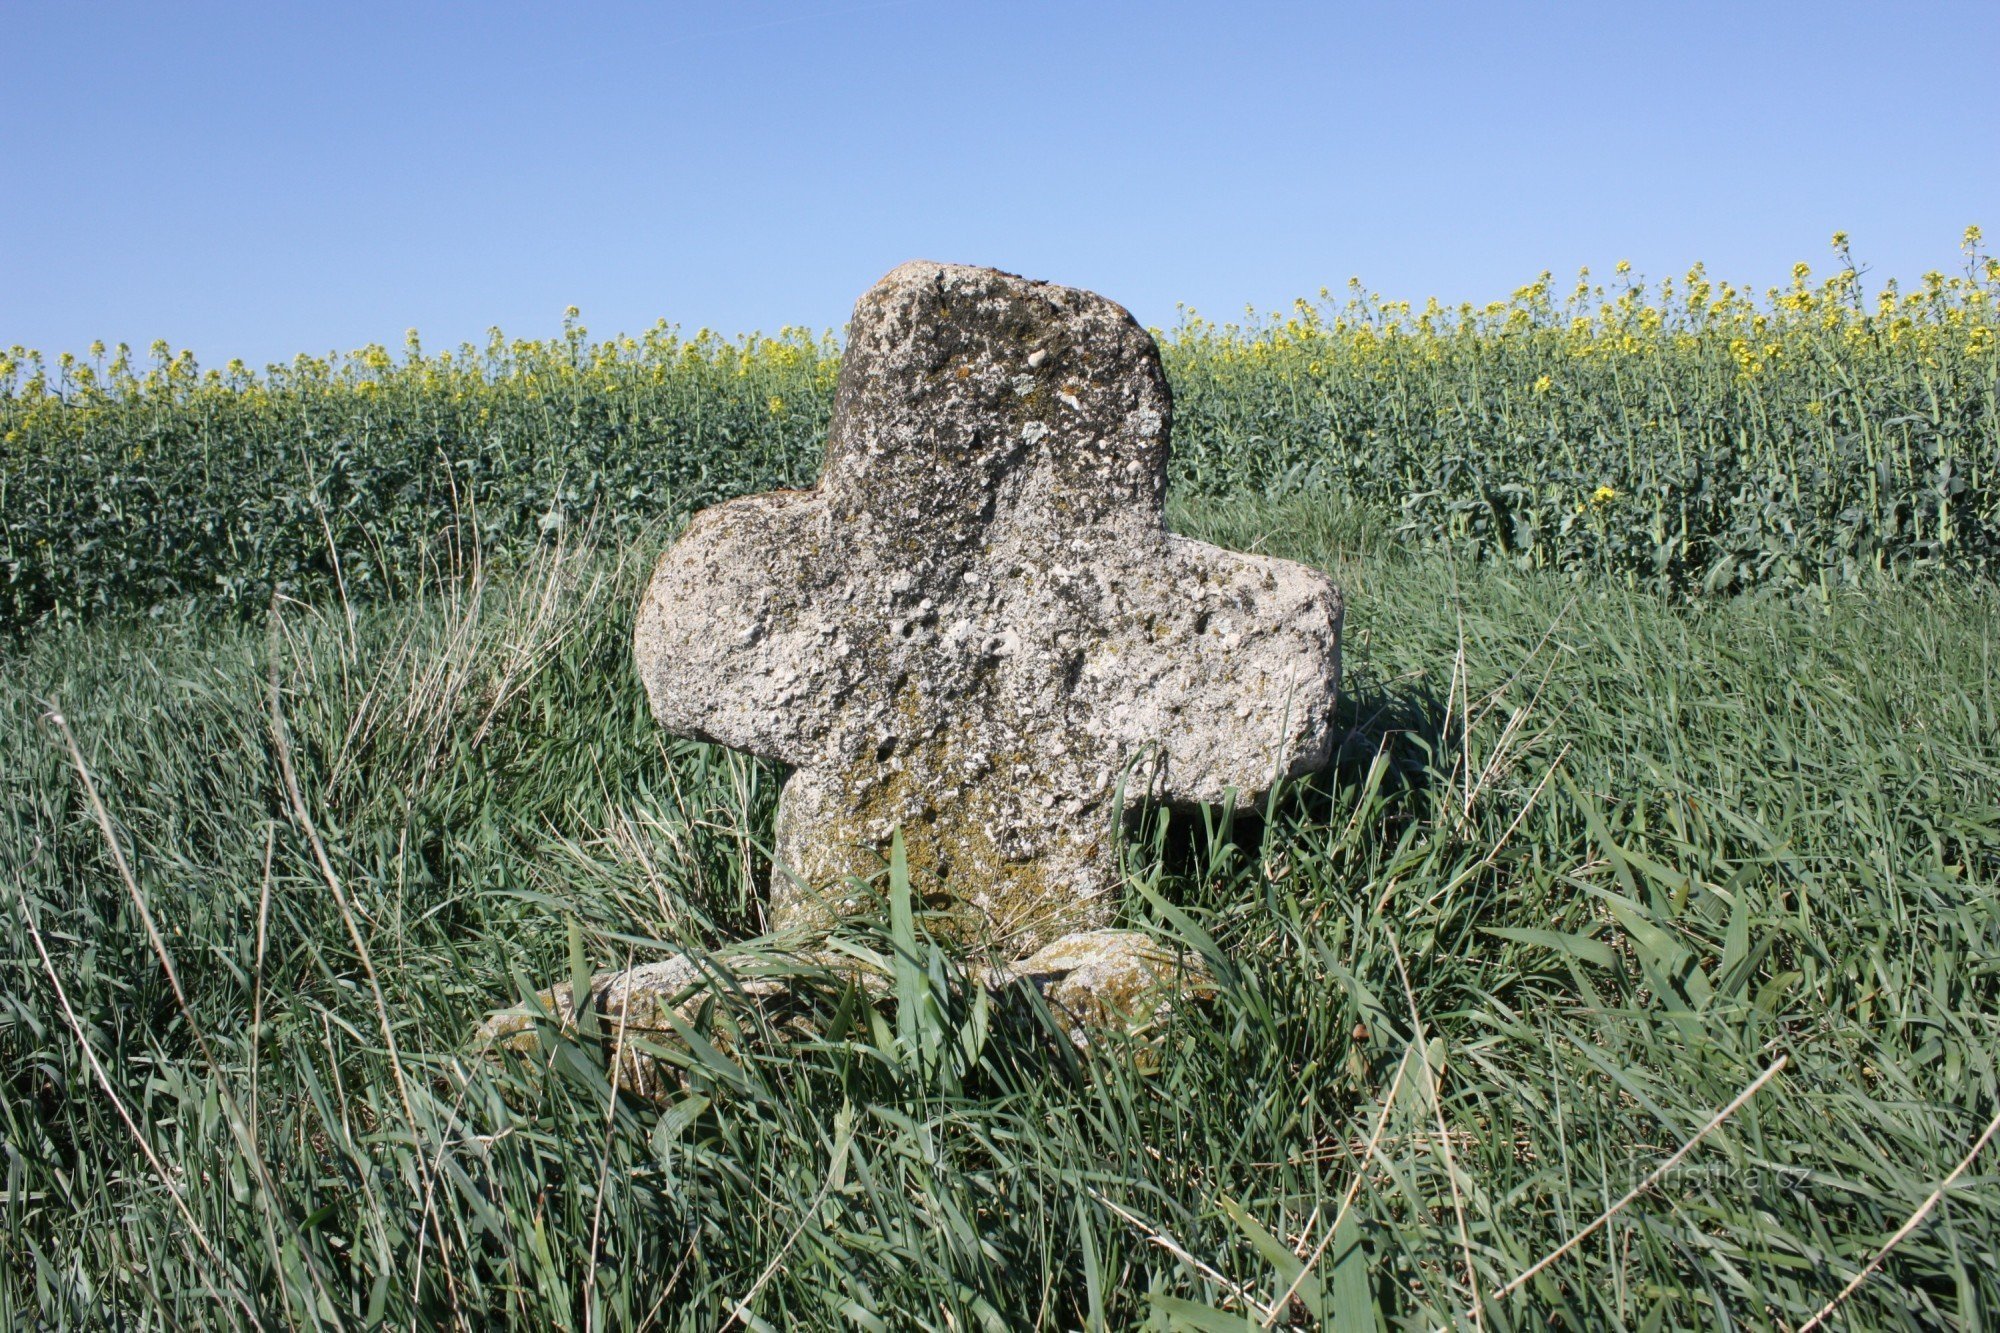 Cross of reconciliation in the fields near Bohdalice